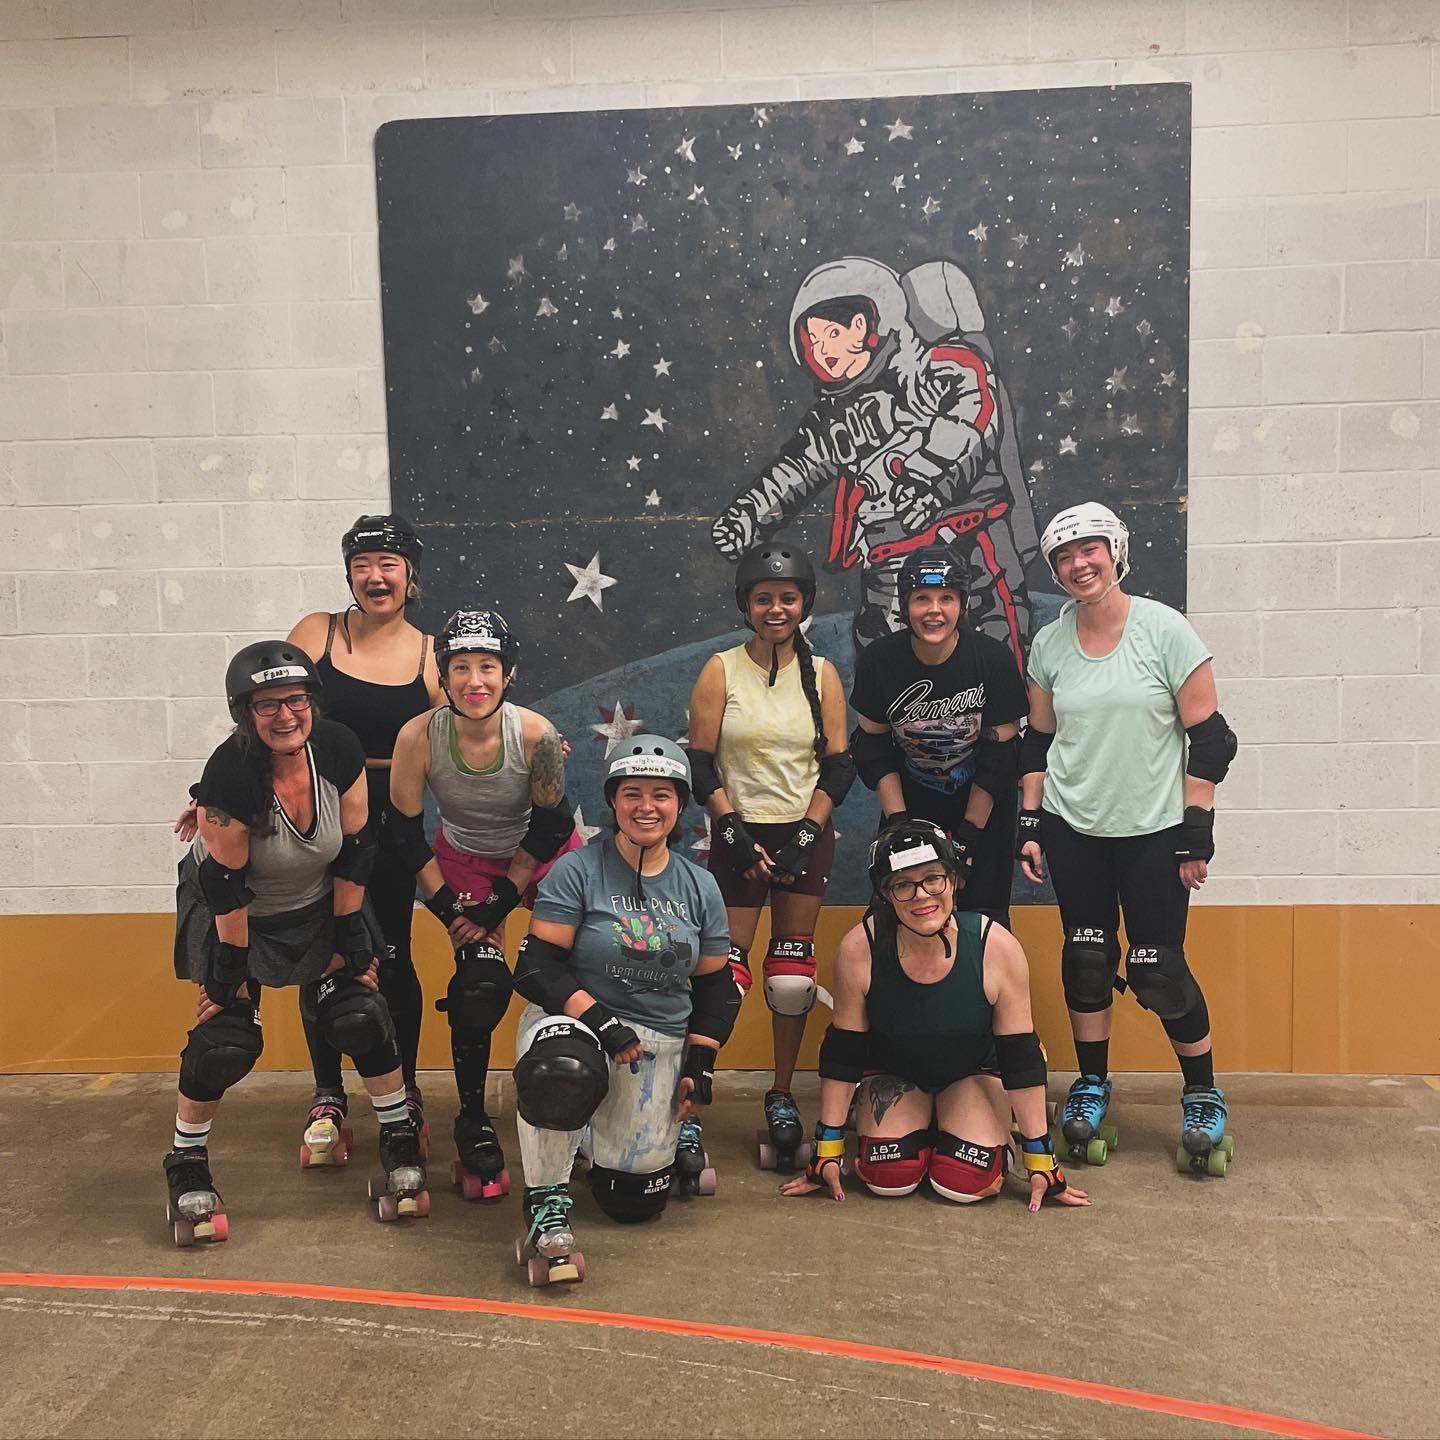 CONGRATS!!! All 8 of our Level 2 skaters passed their assessments! We are all so proud of your hard work and dedication! Now it&rsquo;s time for scrimmage 😎

#iwlr #ithacarollerderby #newskater #wftda #rollerderby #strongalthetes #strong #team #itha